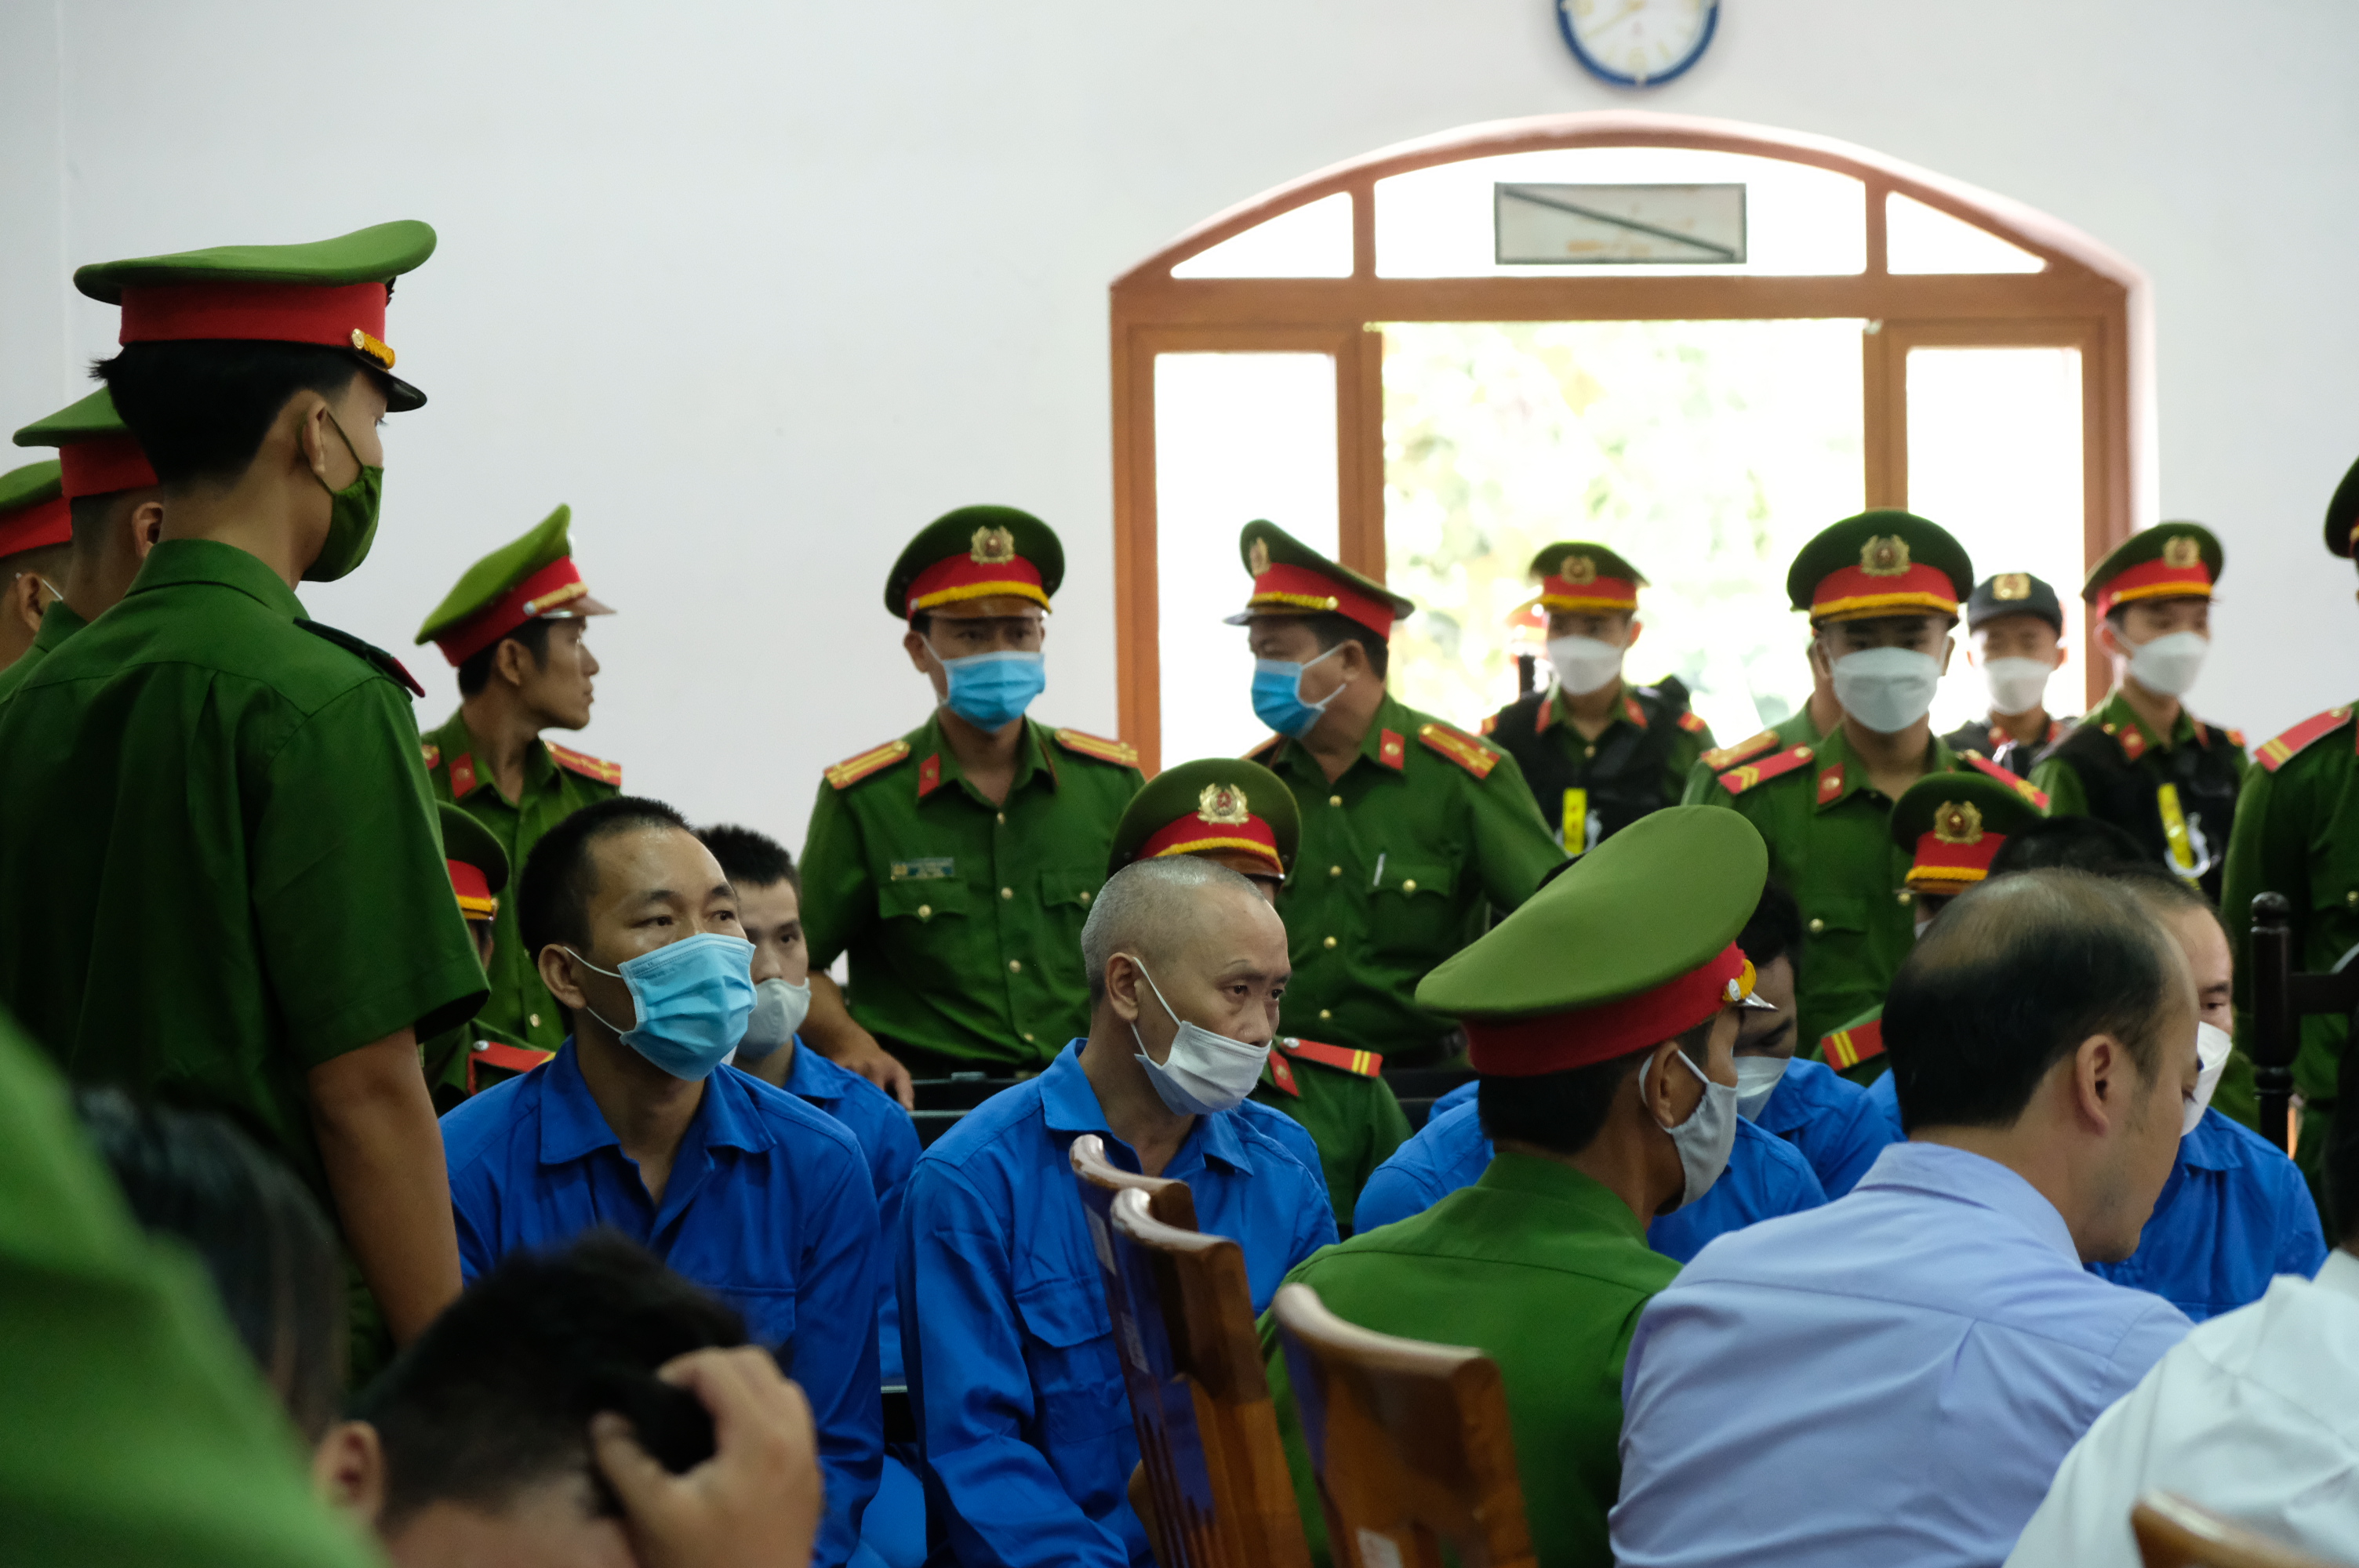 The defendants during the trial at the People’s Court in Dak Nong Province, Vietnam, July 13, 2022. Photo: Dinh Cuong / Tuoi Tre